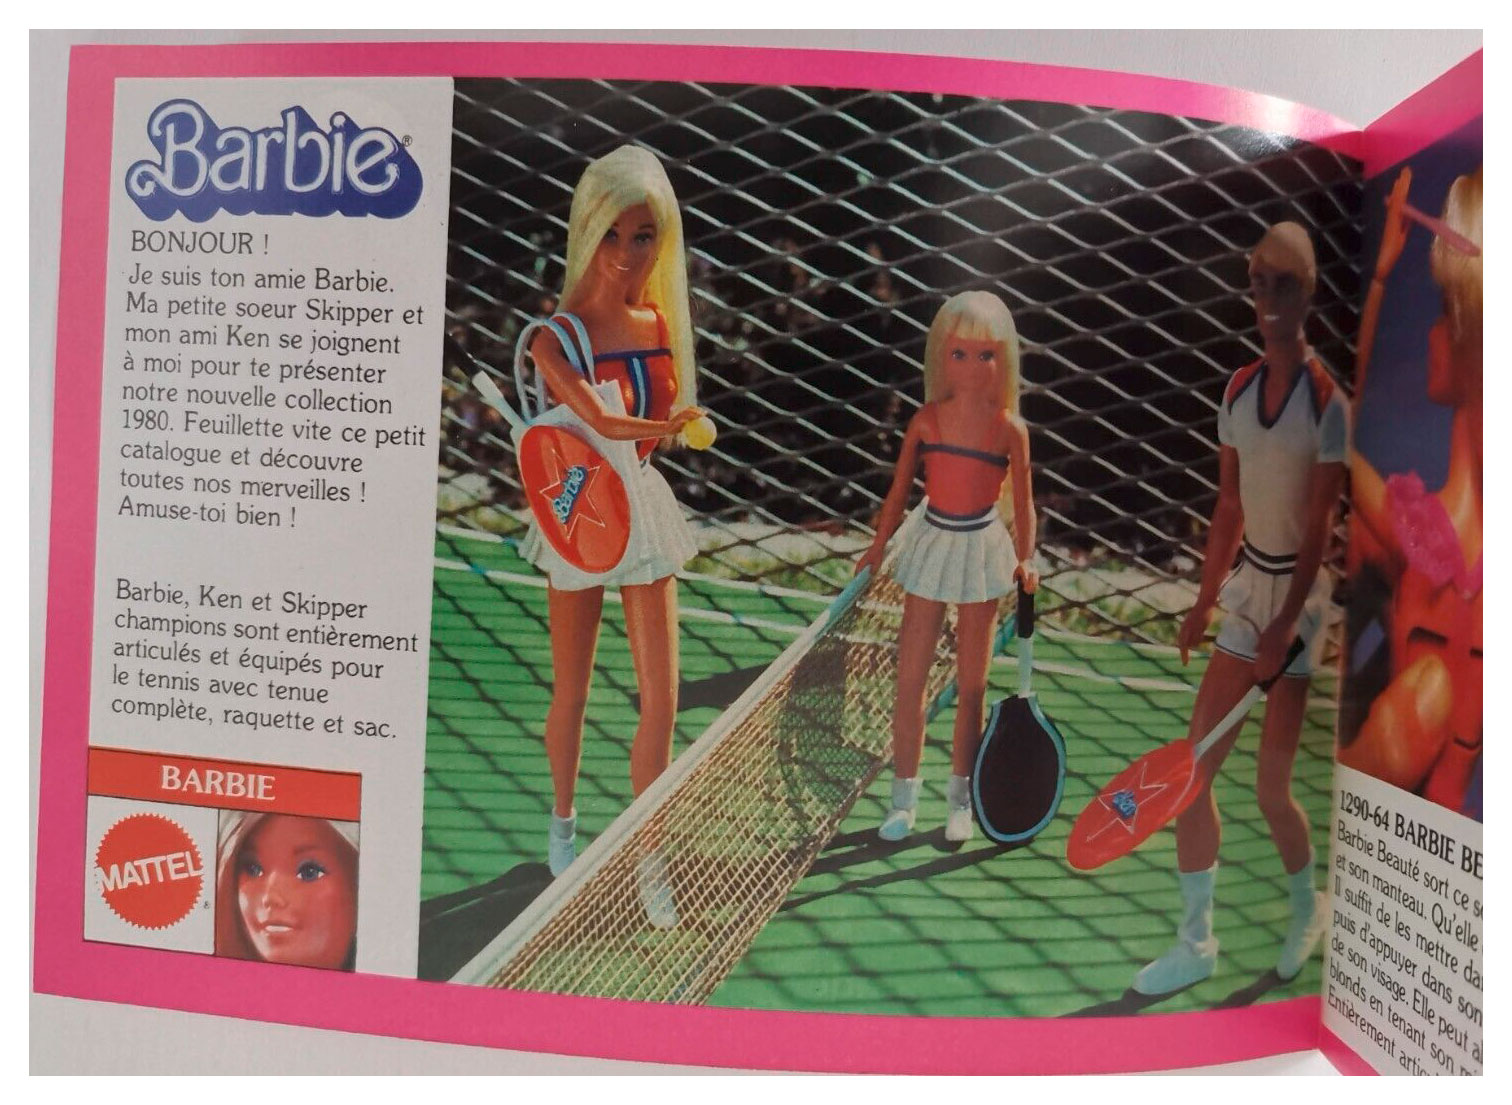 From 1980 French Barbie booklet